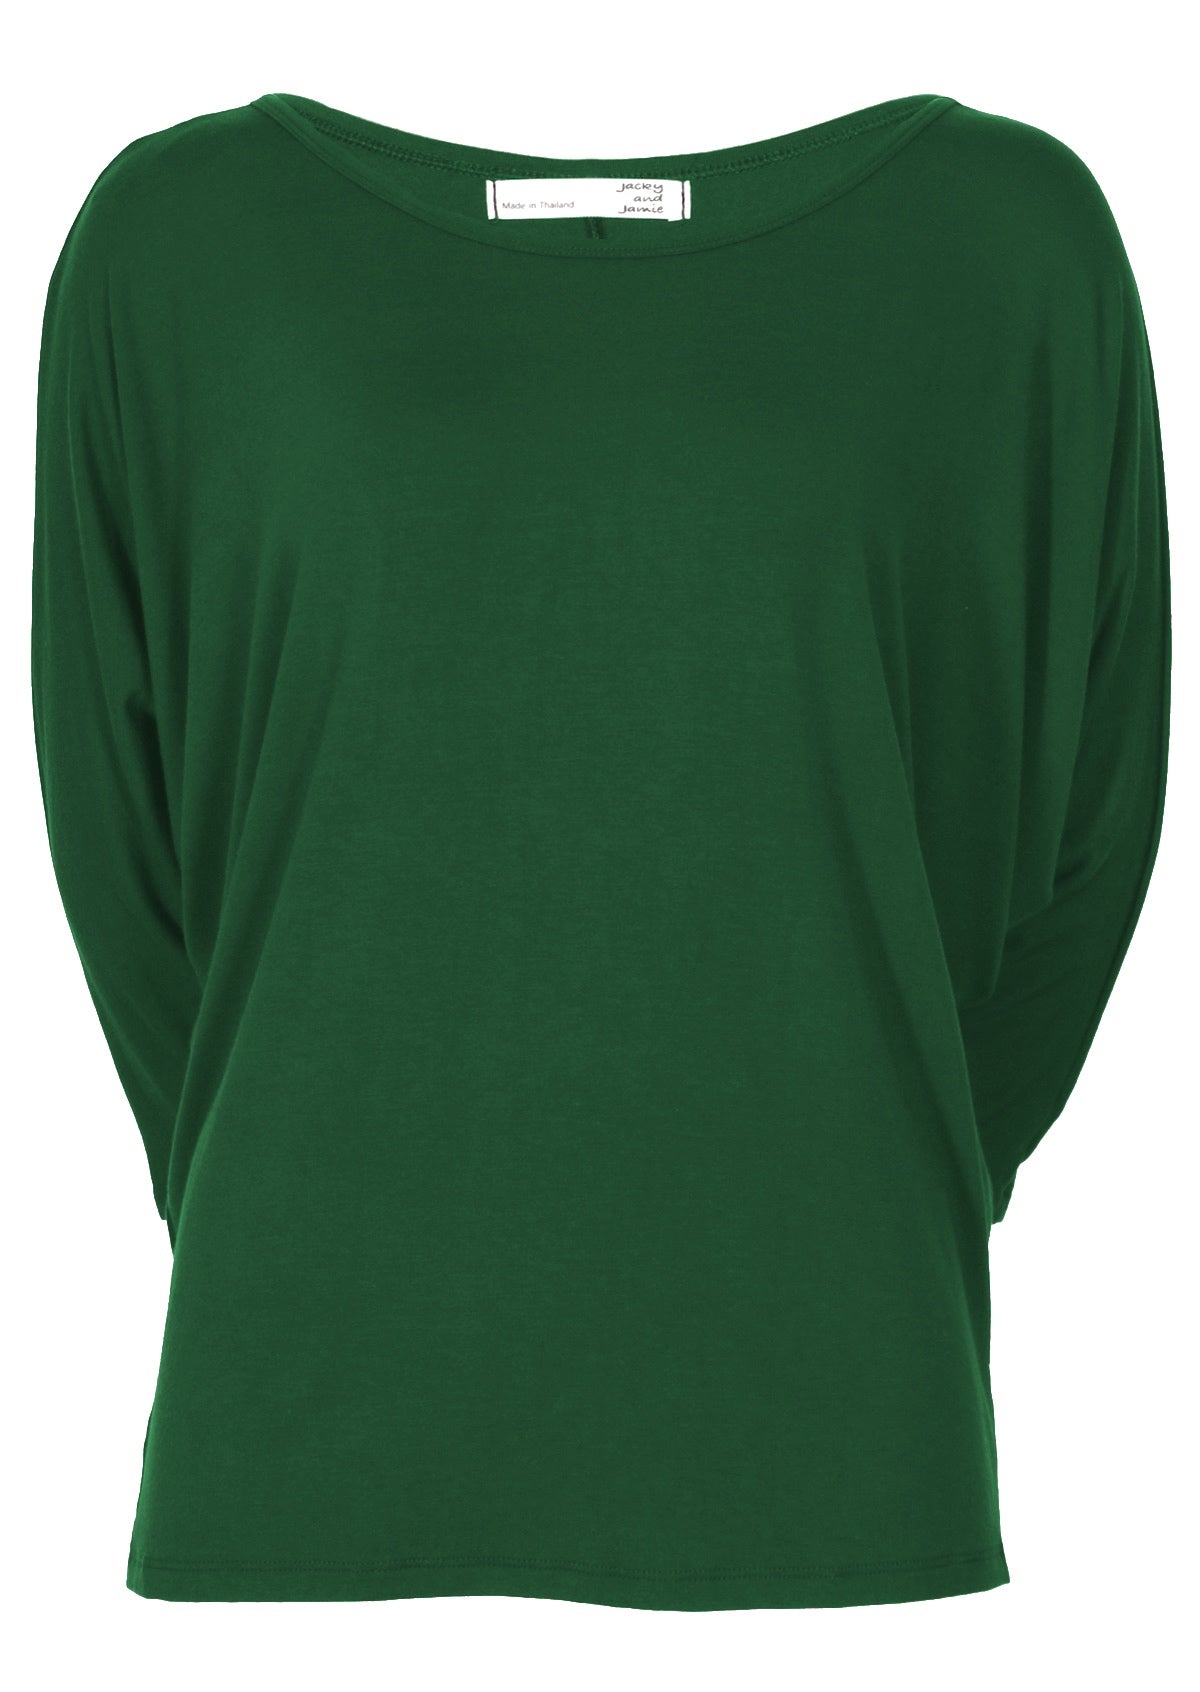 Front view of women's 3/4 sleeve rayon batwing round neckline green top.